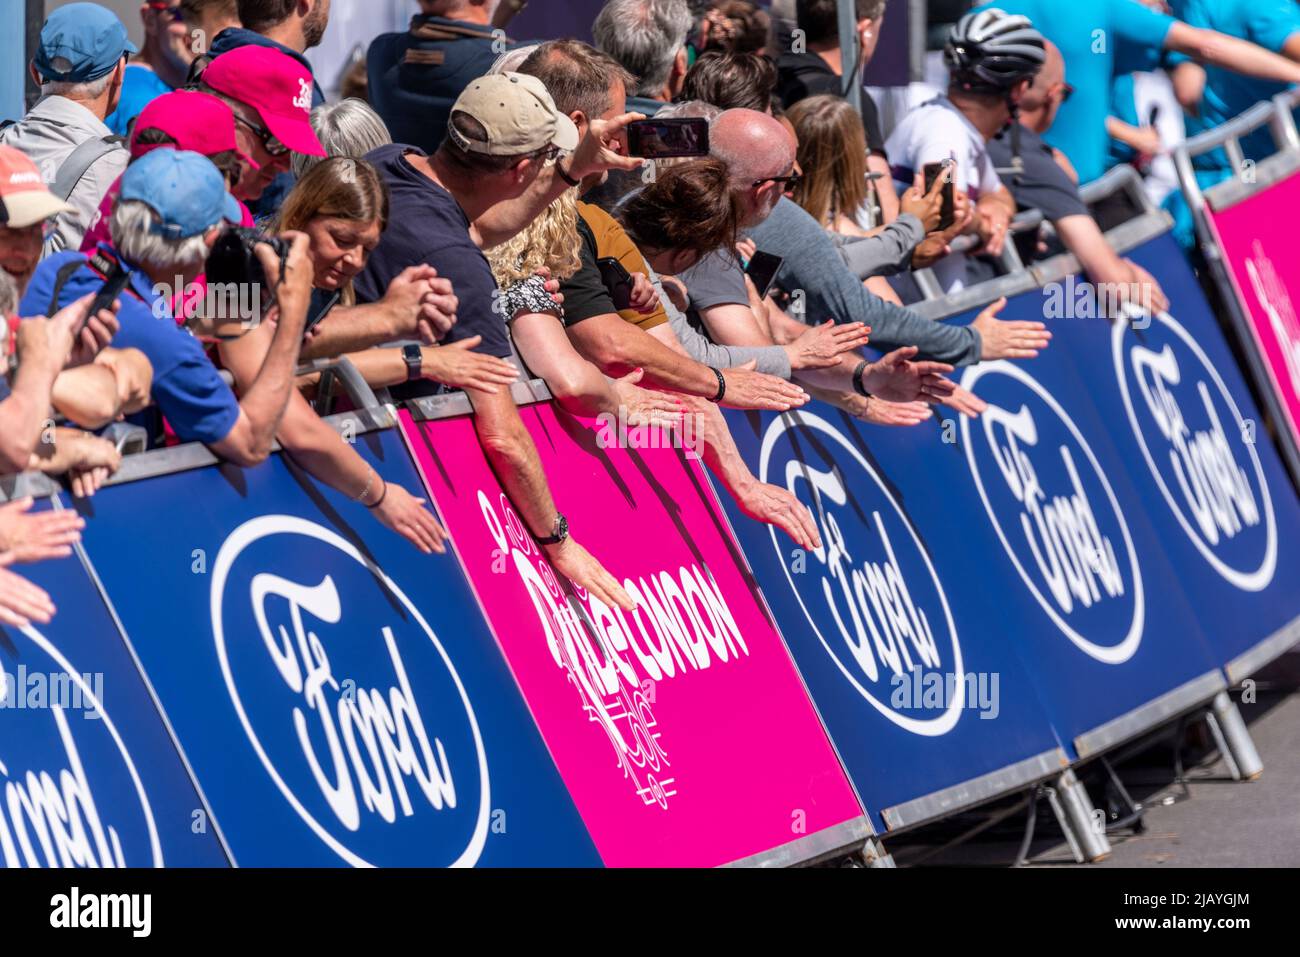 Crowds at the finish line at the RideLondon Classique cycle race stage 1, at Maldon, Essex, UK, banging the advertising boards to inspire riders Stock Photo